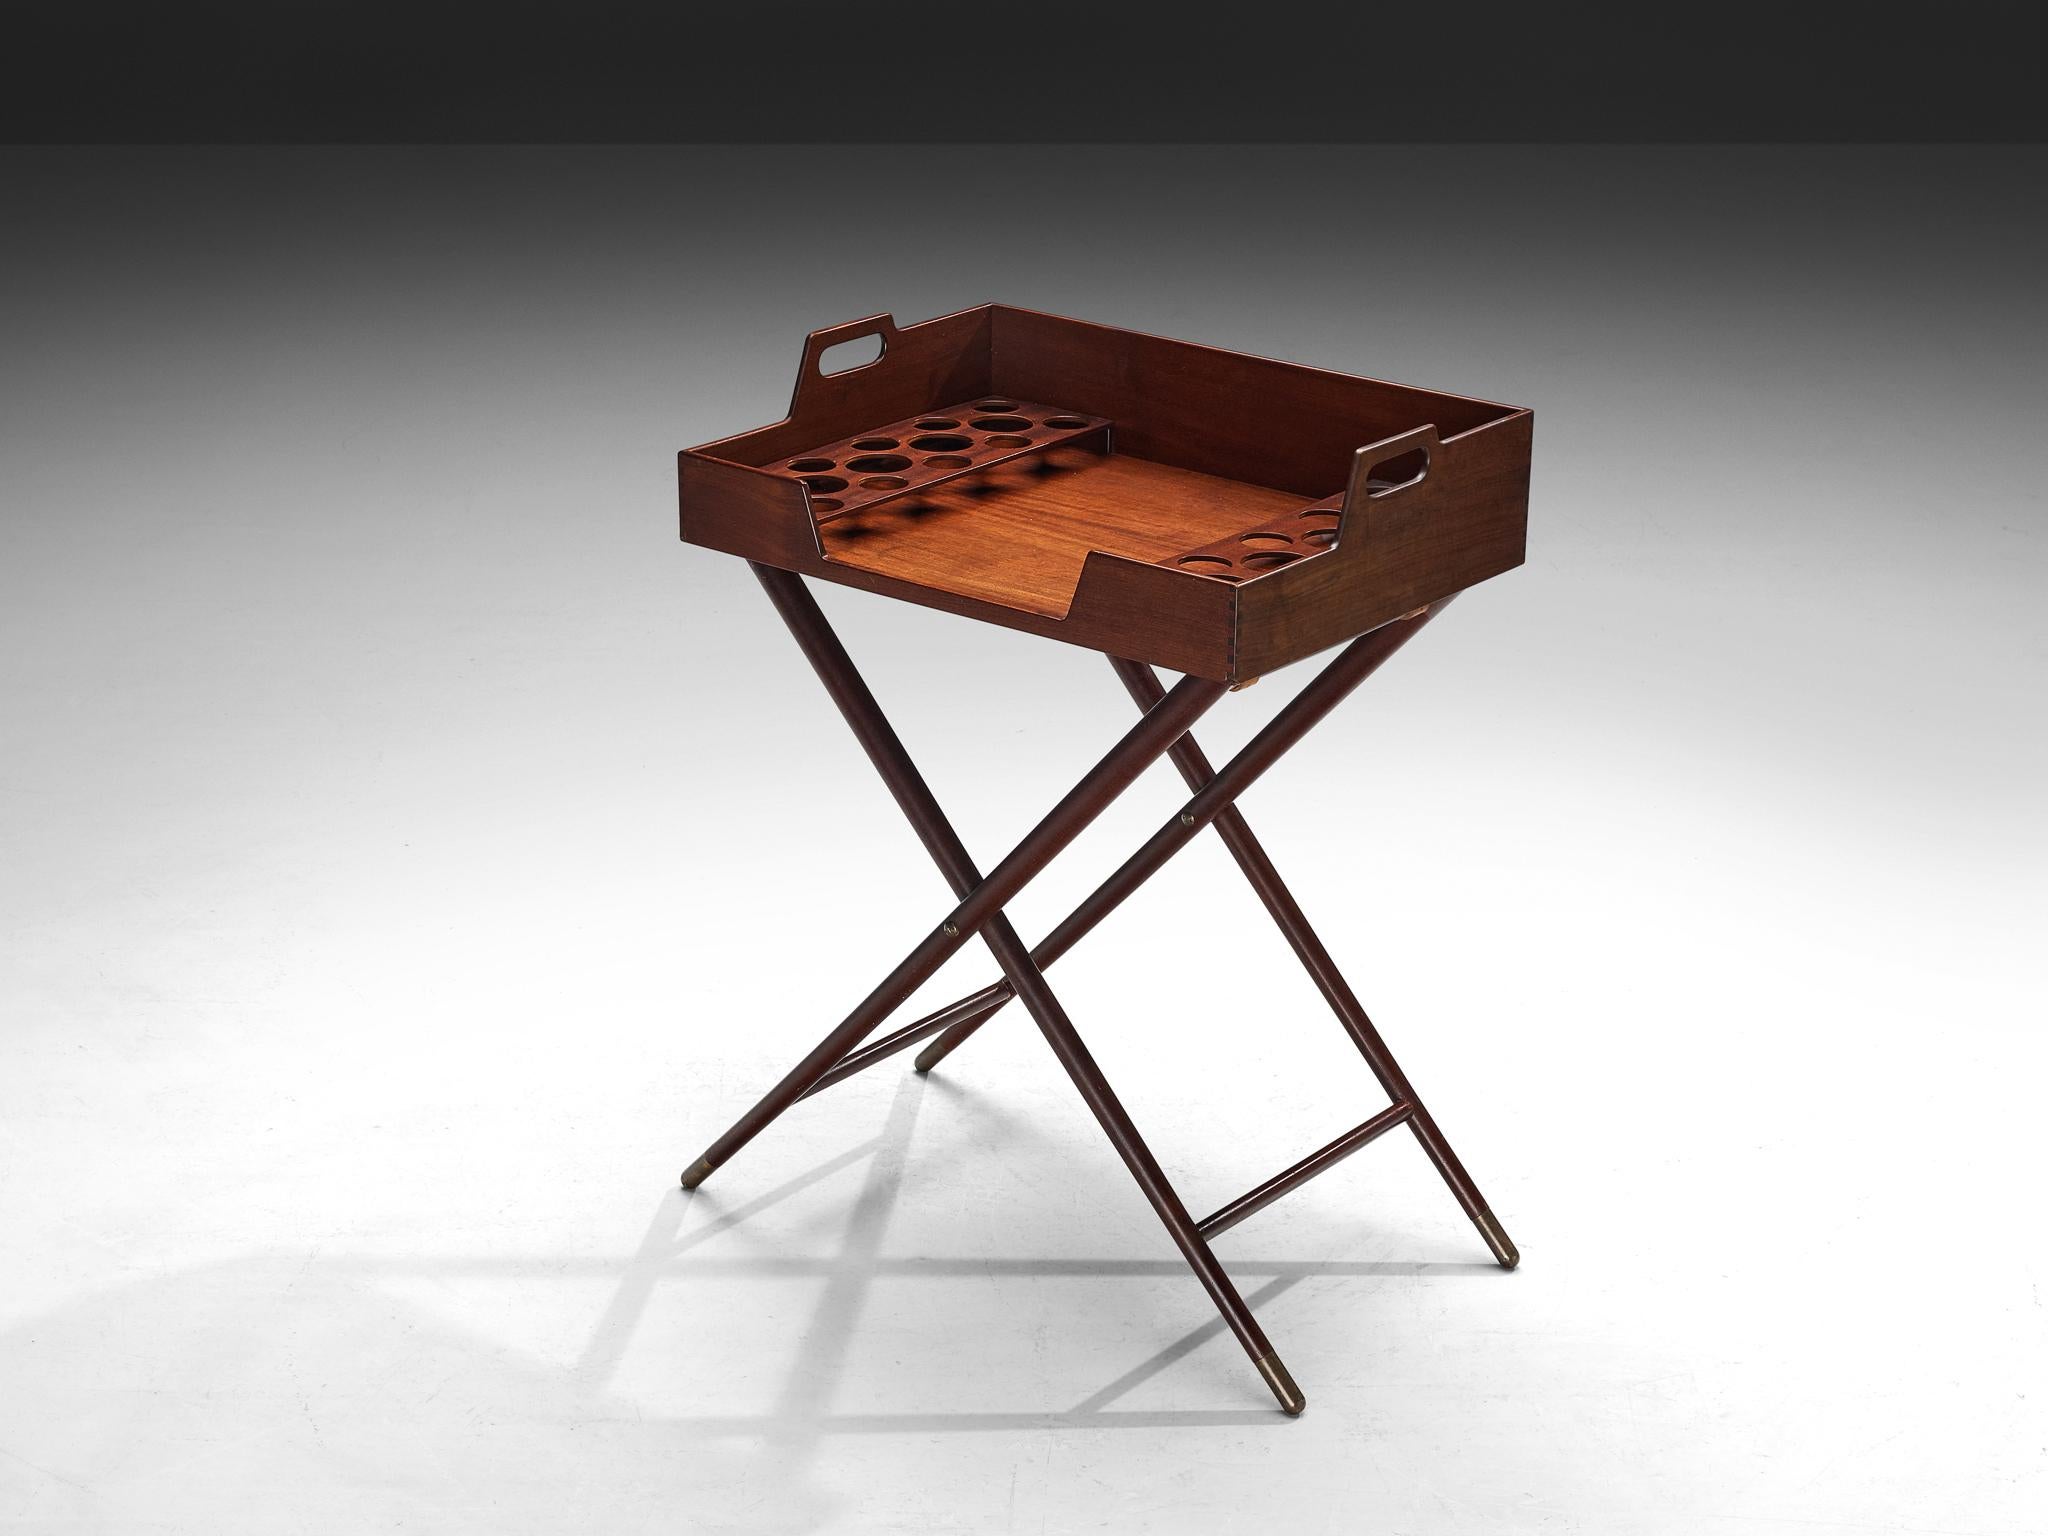 Acton Bjørn, tray table or serving table, teak, brass, leather, Denmark, 1930s

This unique tray table has a splendid construction consisting of a tray that is attached to the base with leather straps. The tray is equipped with handles allowing the